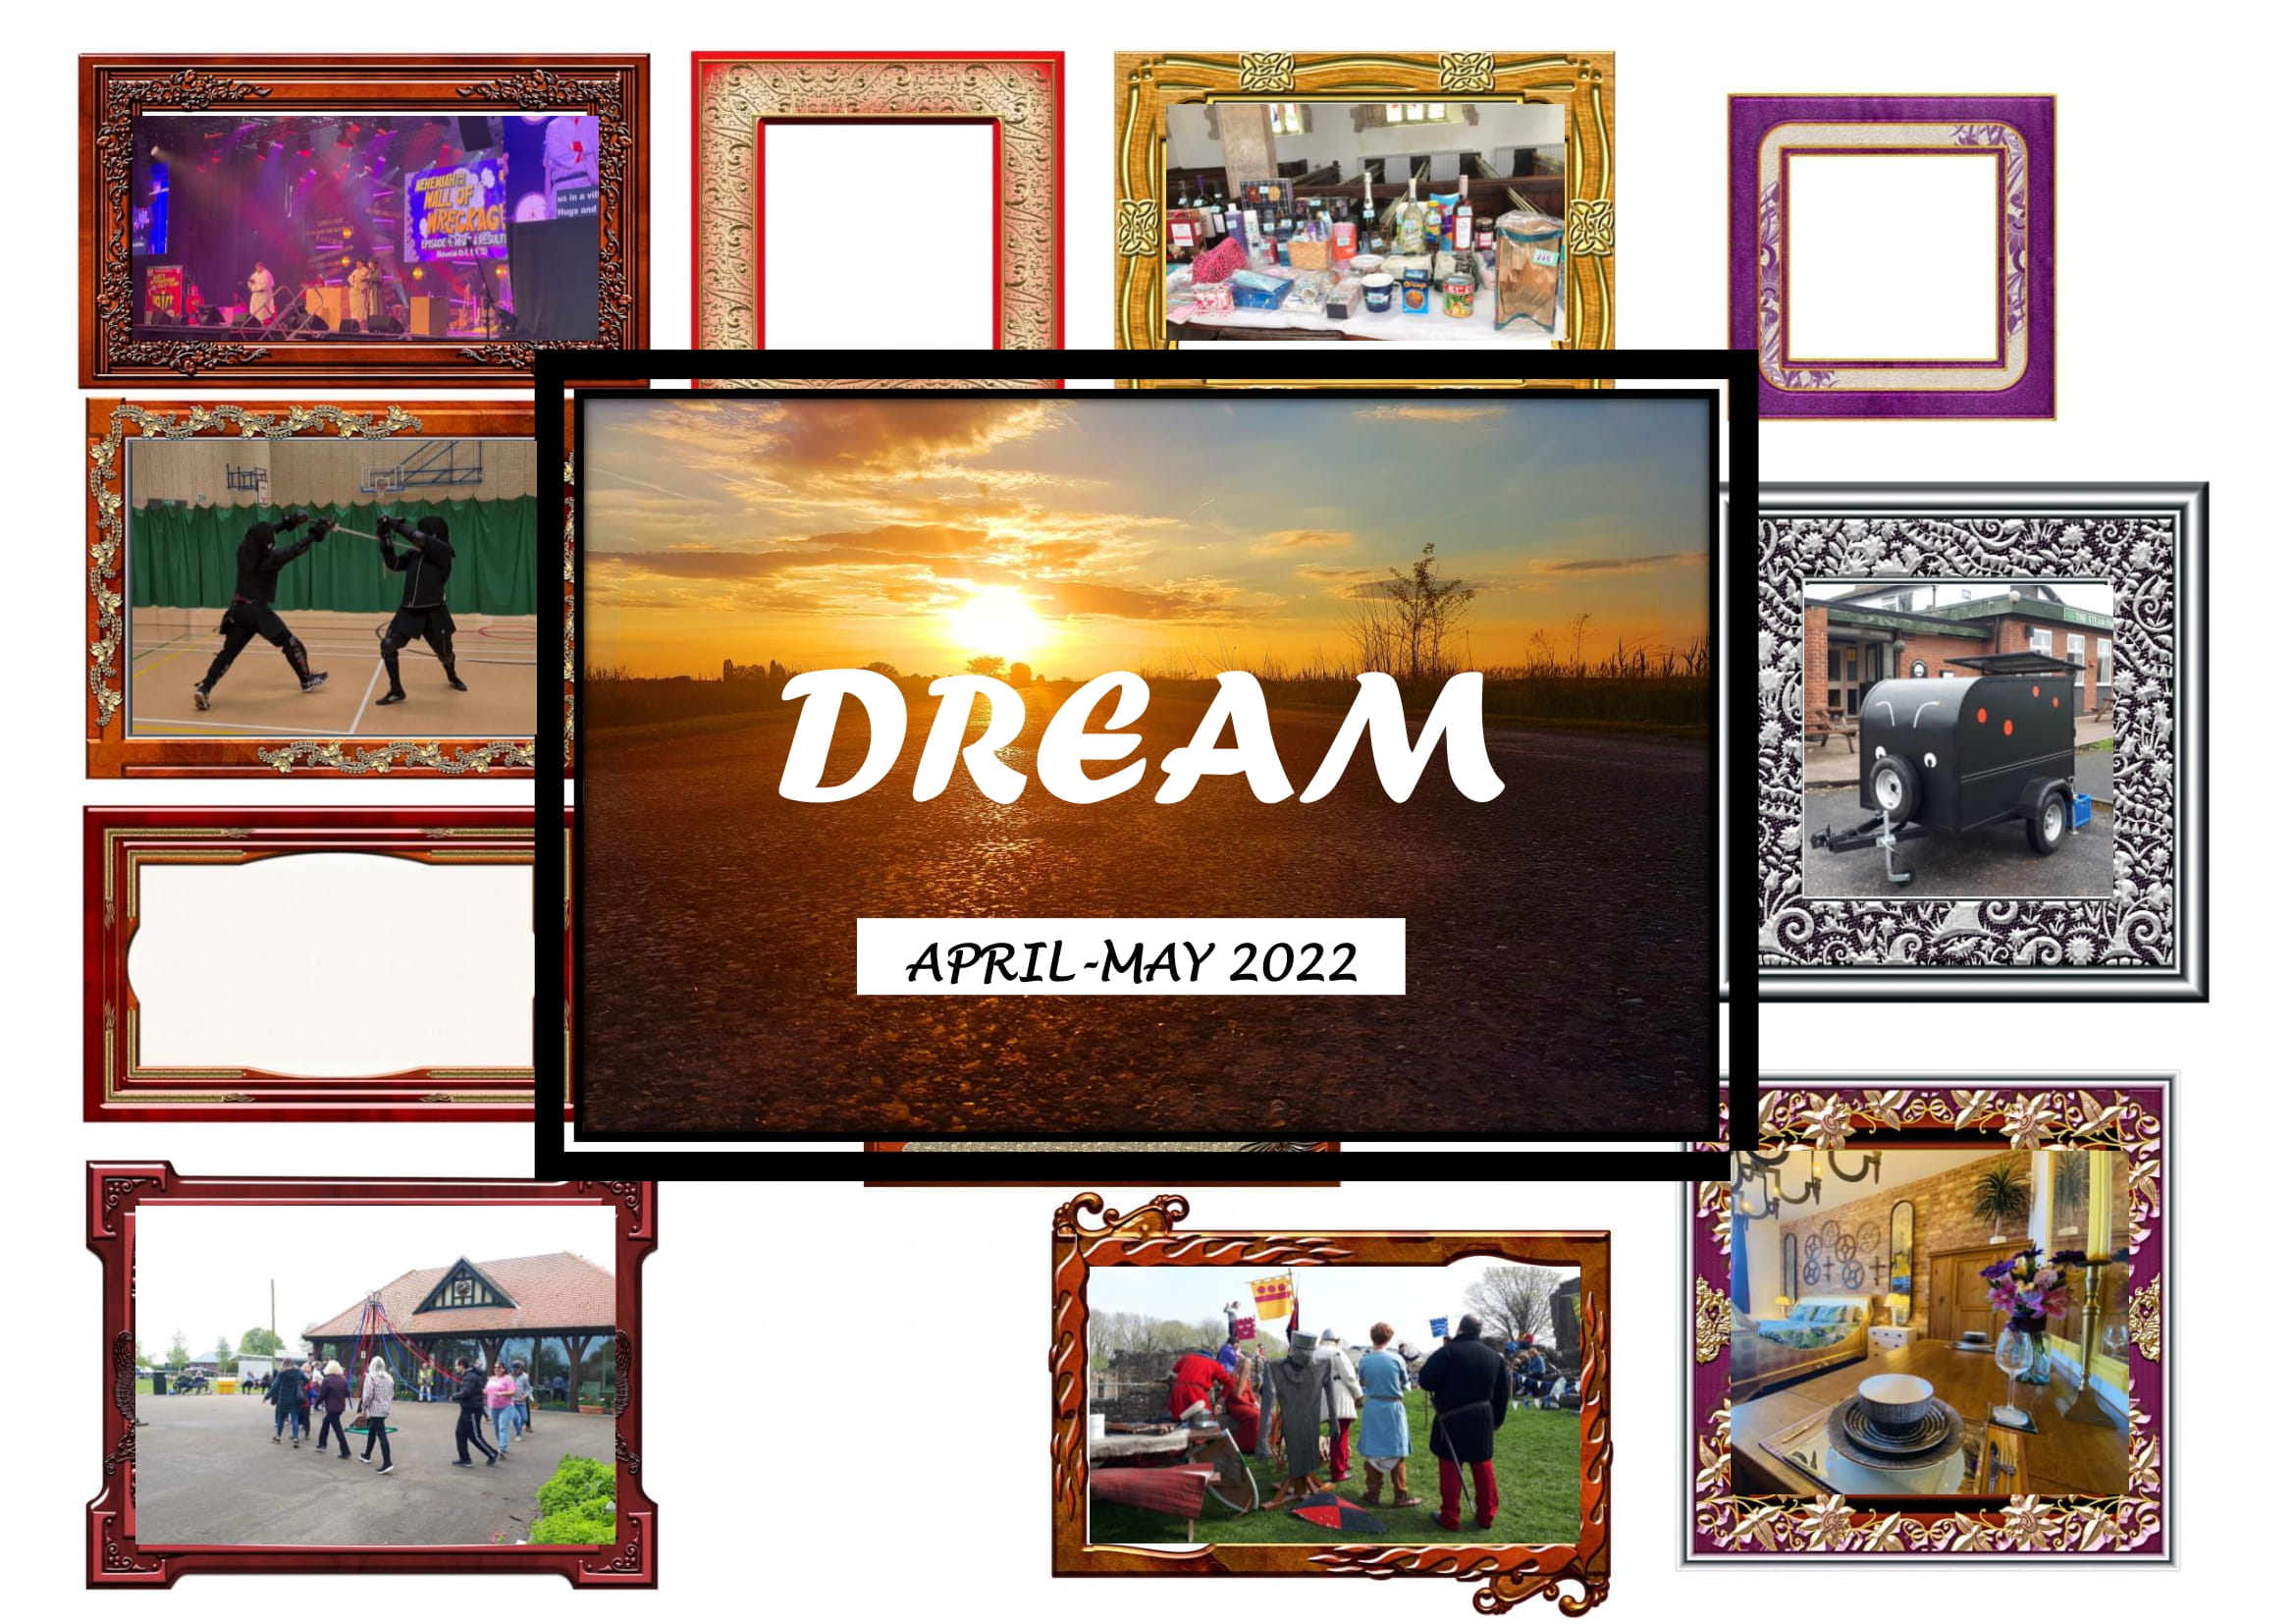 431-april-may-2022-dream-heritage-finished-newsletter-01.jpg